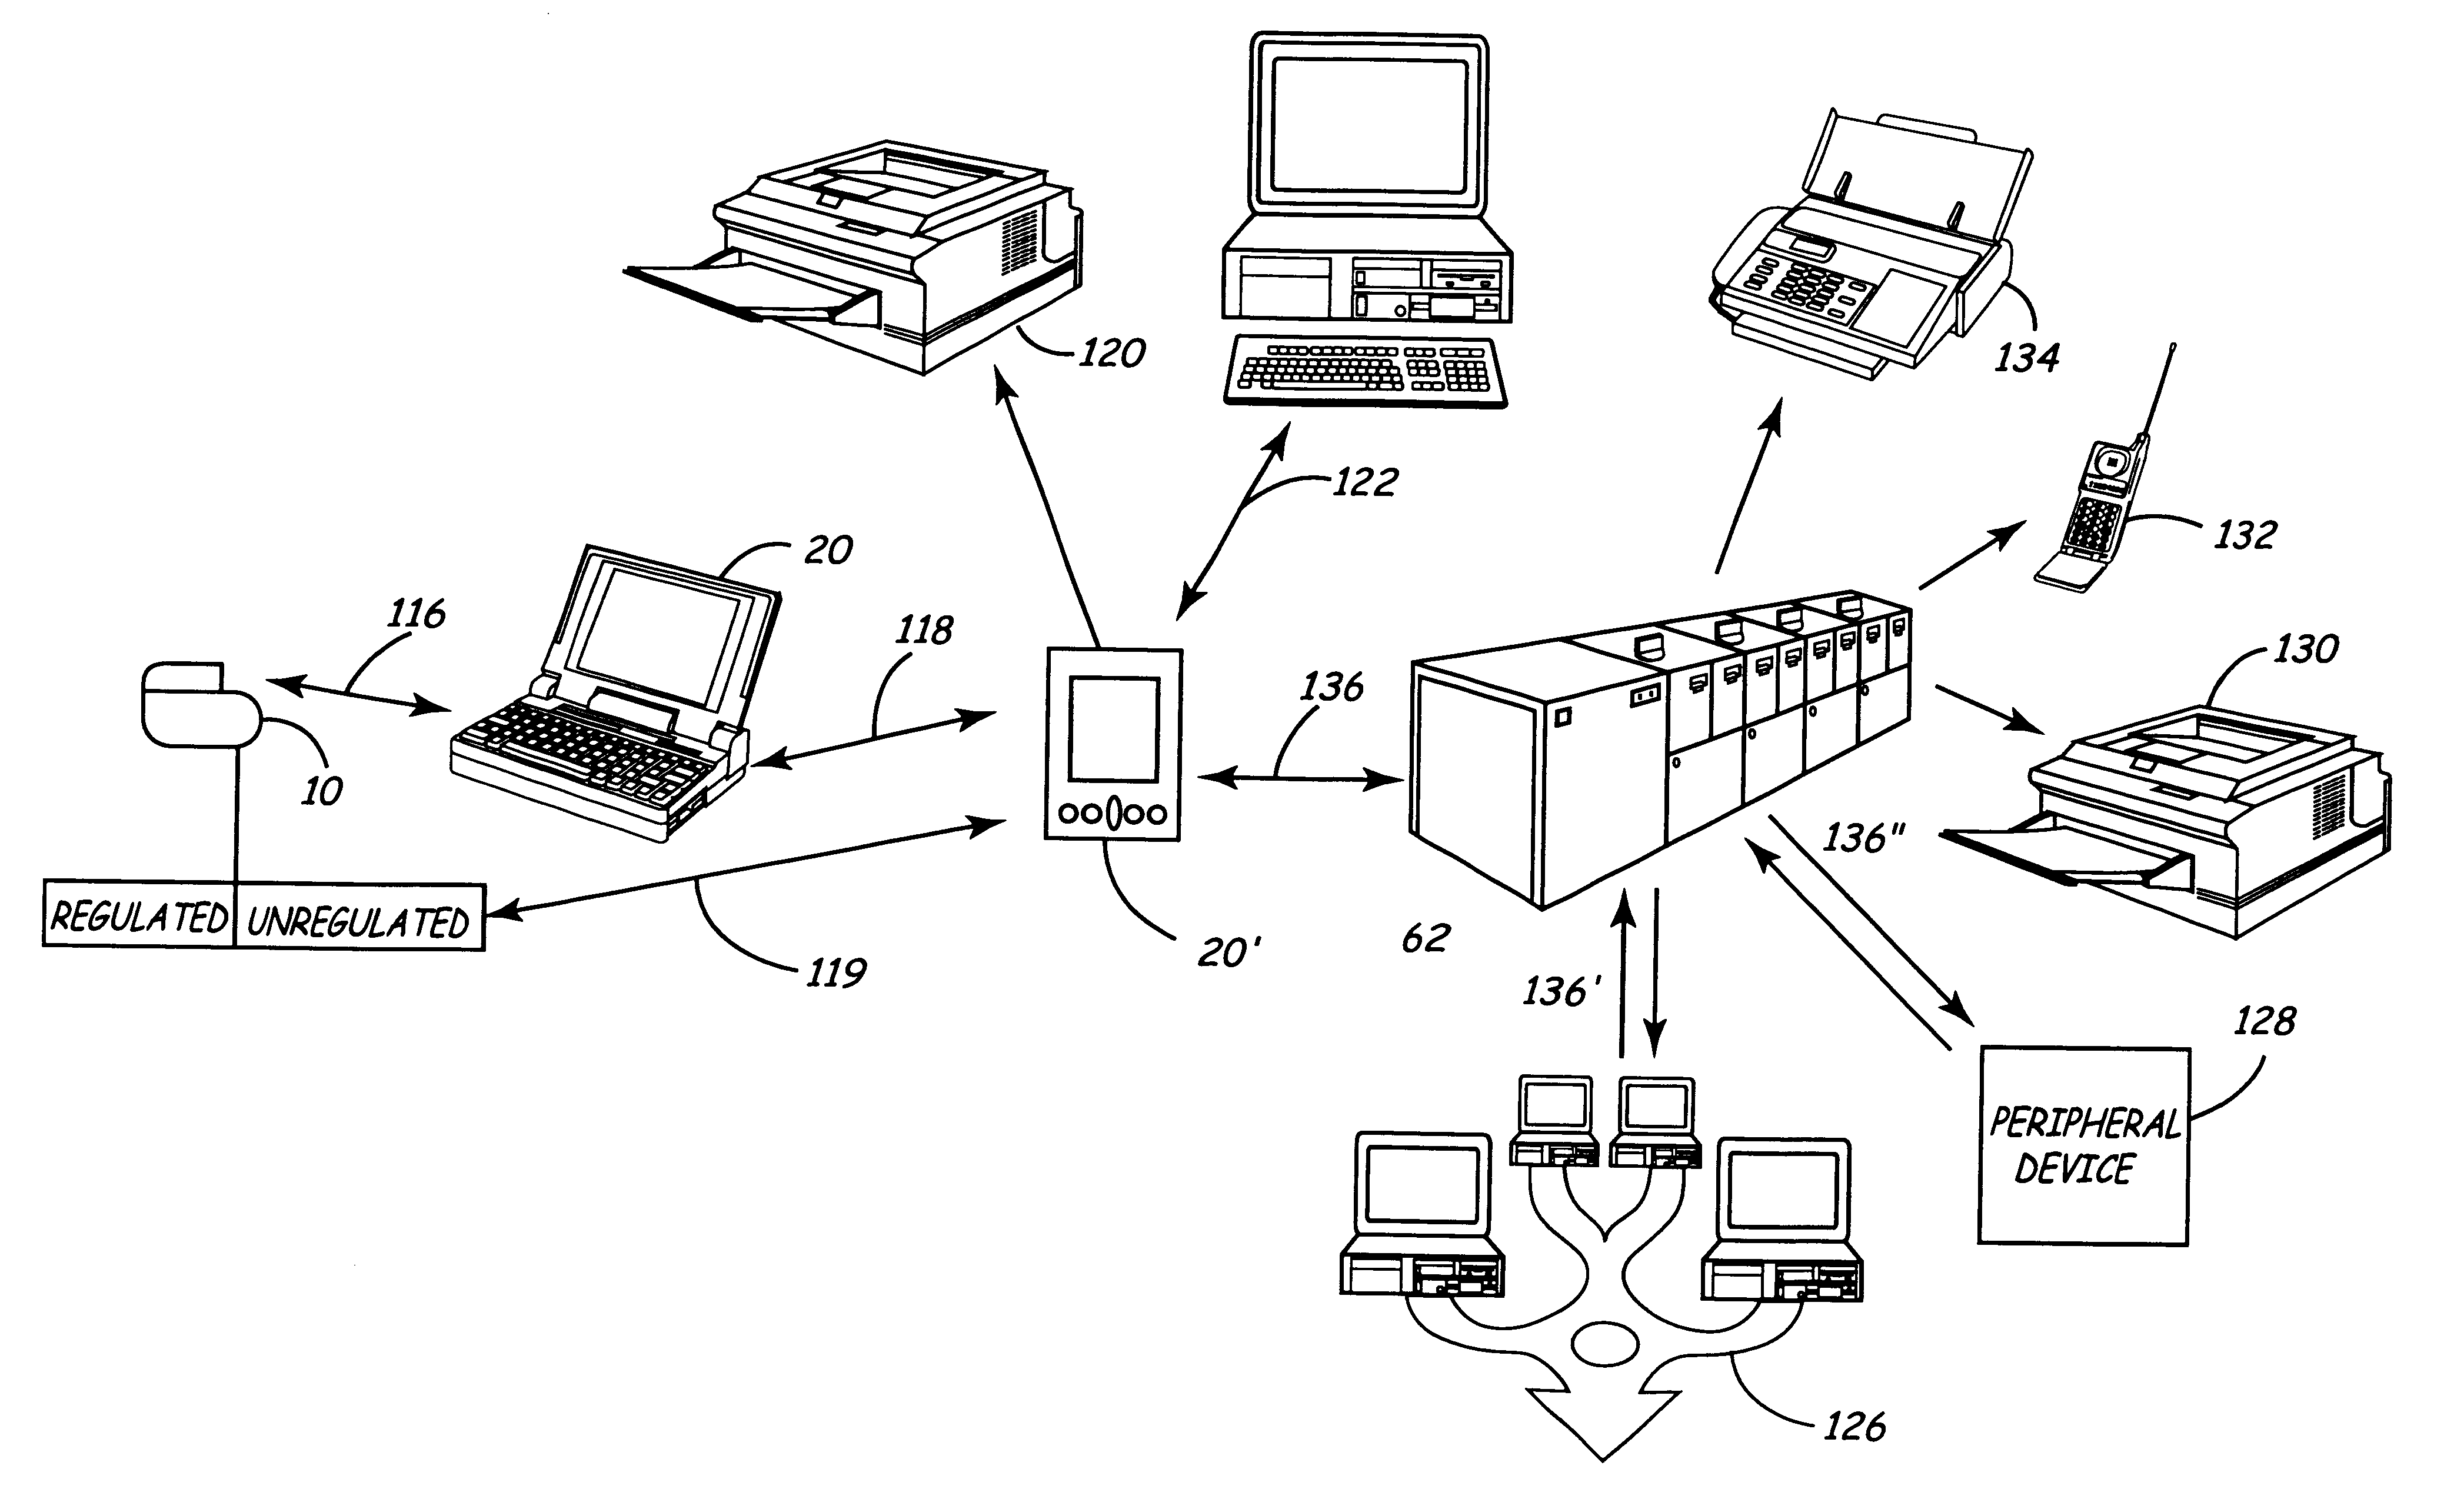 Apparatus and method for remote therapy and diagnosis in medical devices via interface systems